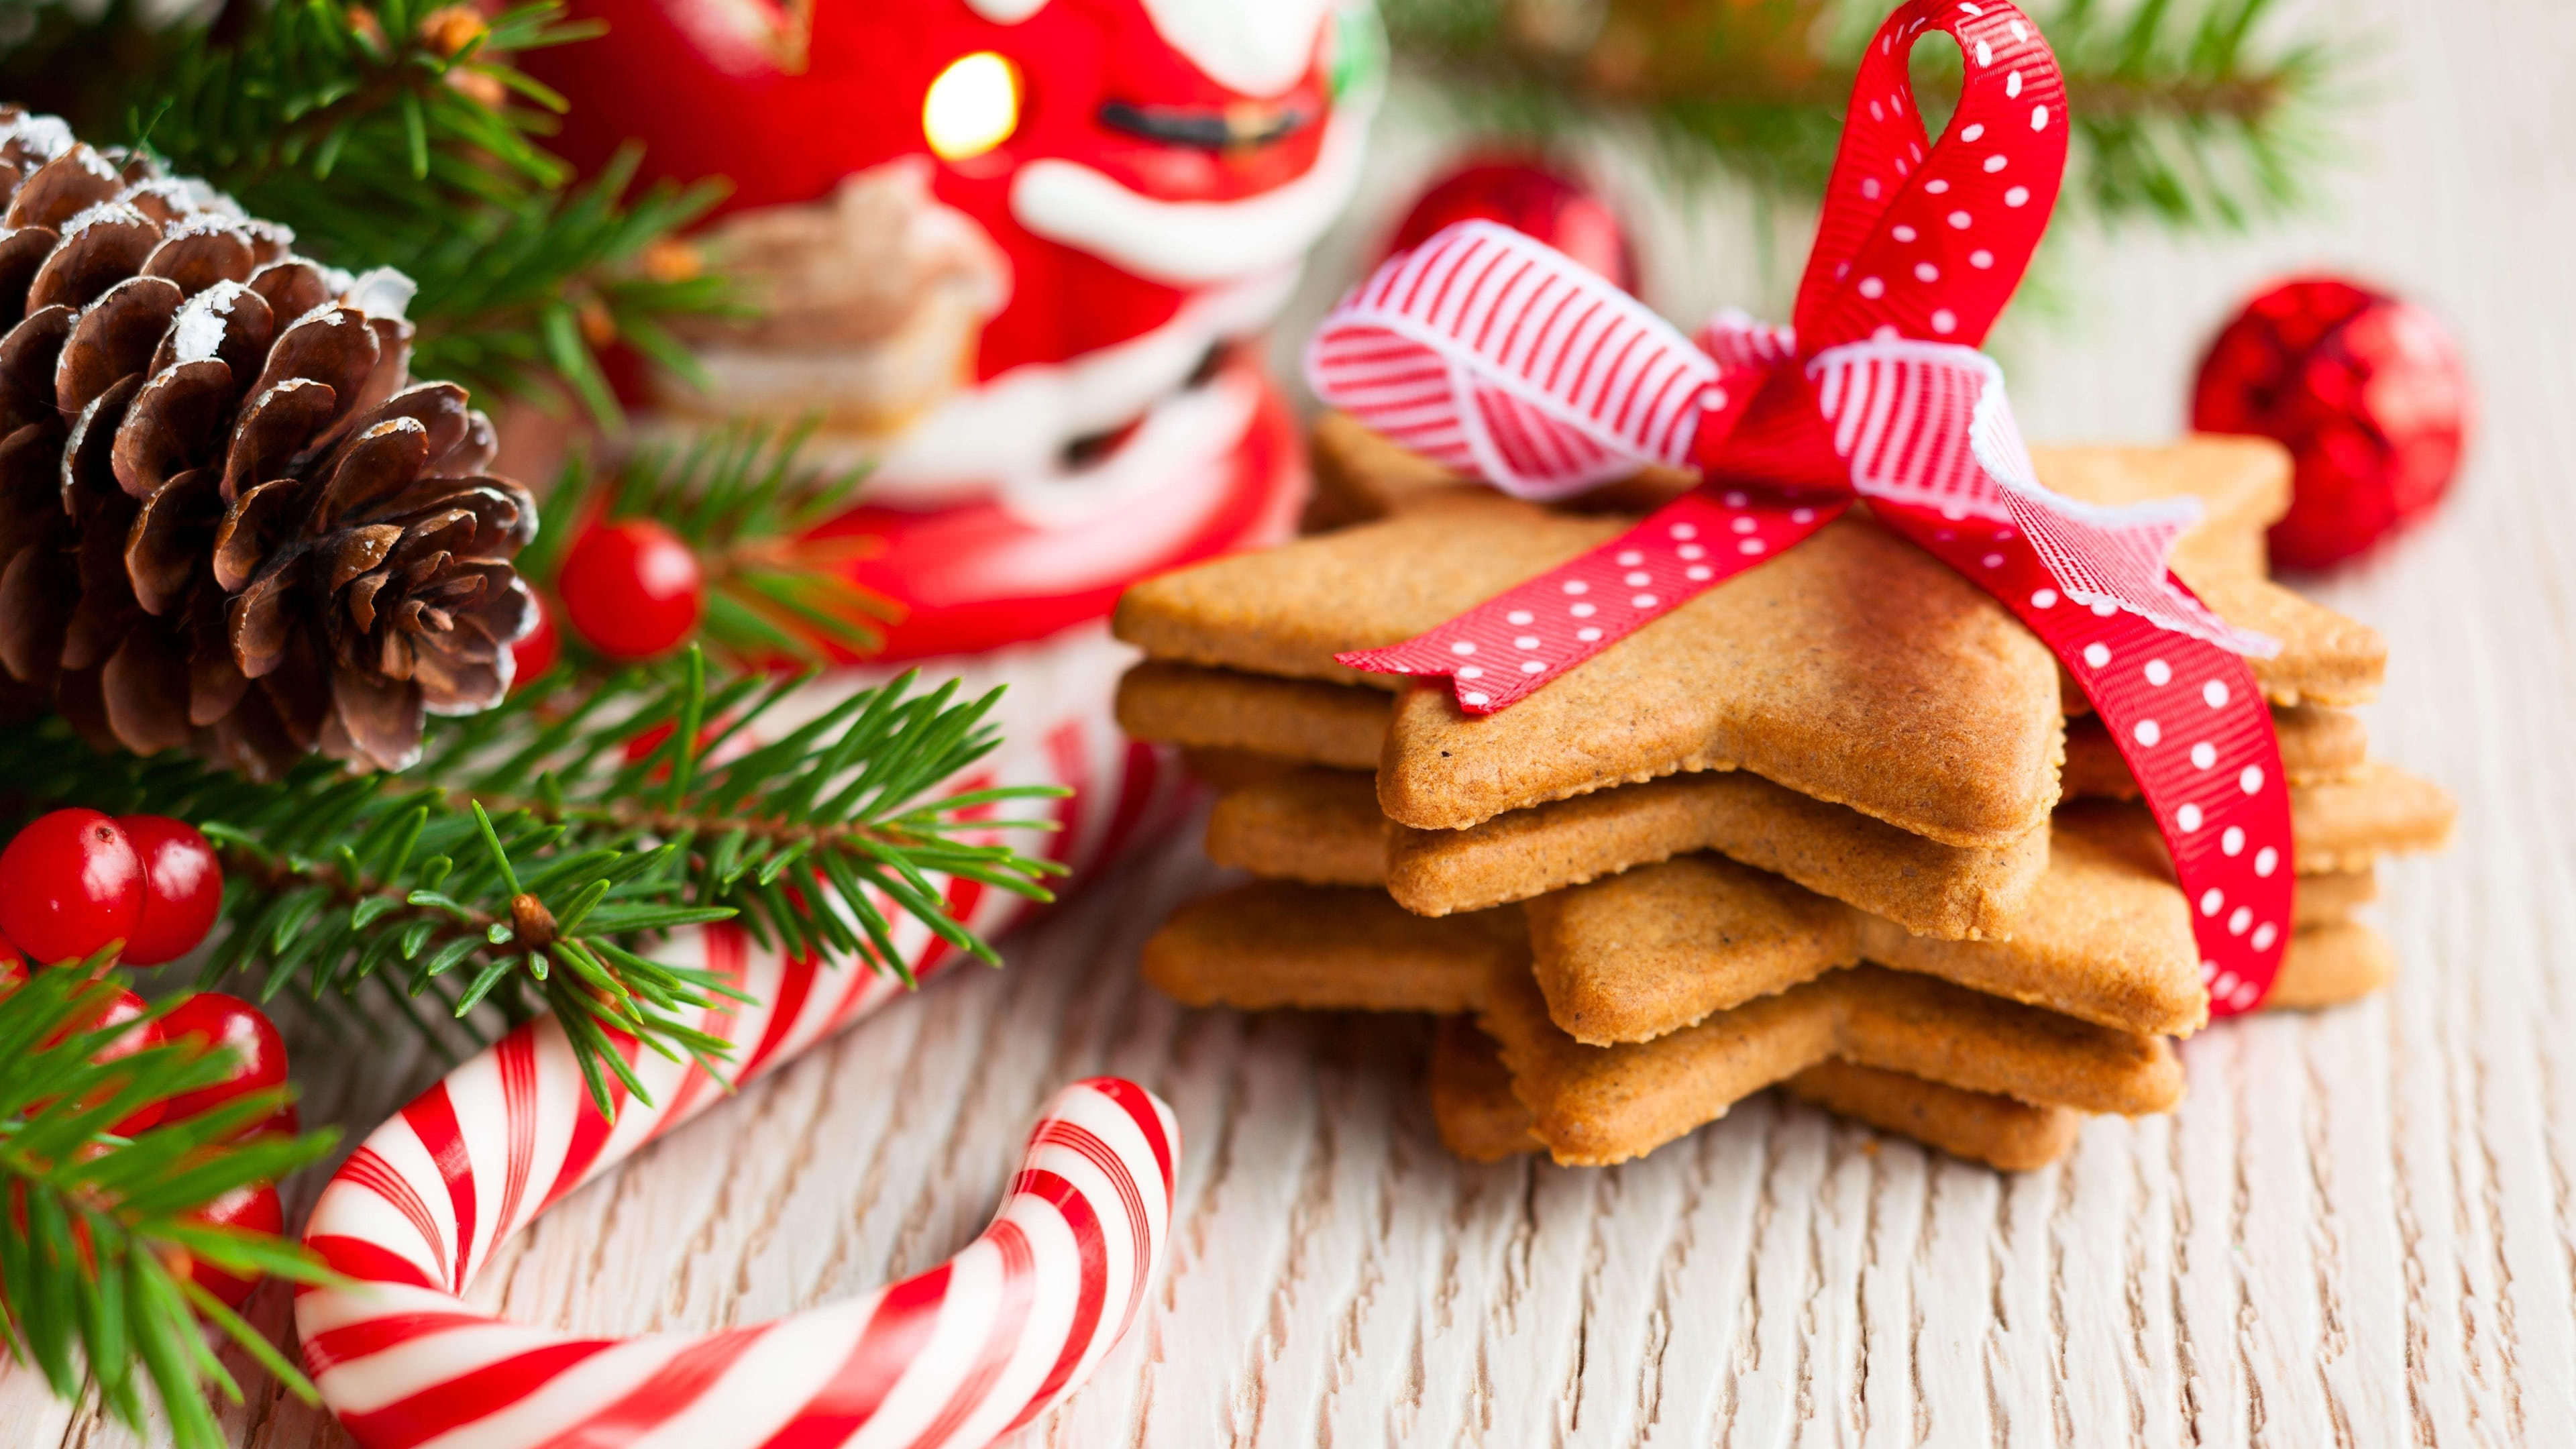 Biscuit: Gingerbread, Baked goods, typically flavored with ginger. 3840x2160 4K Background.